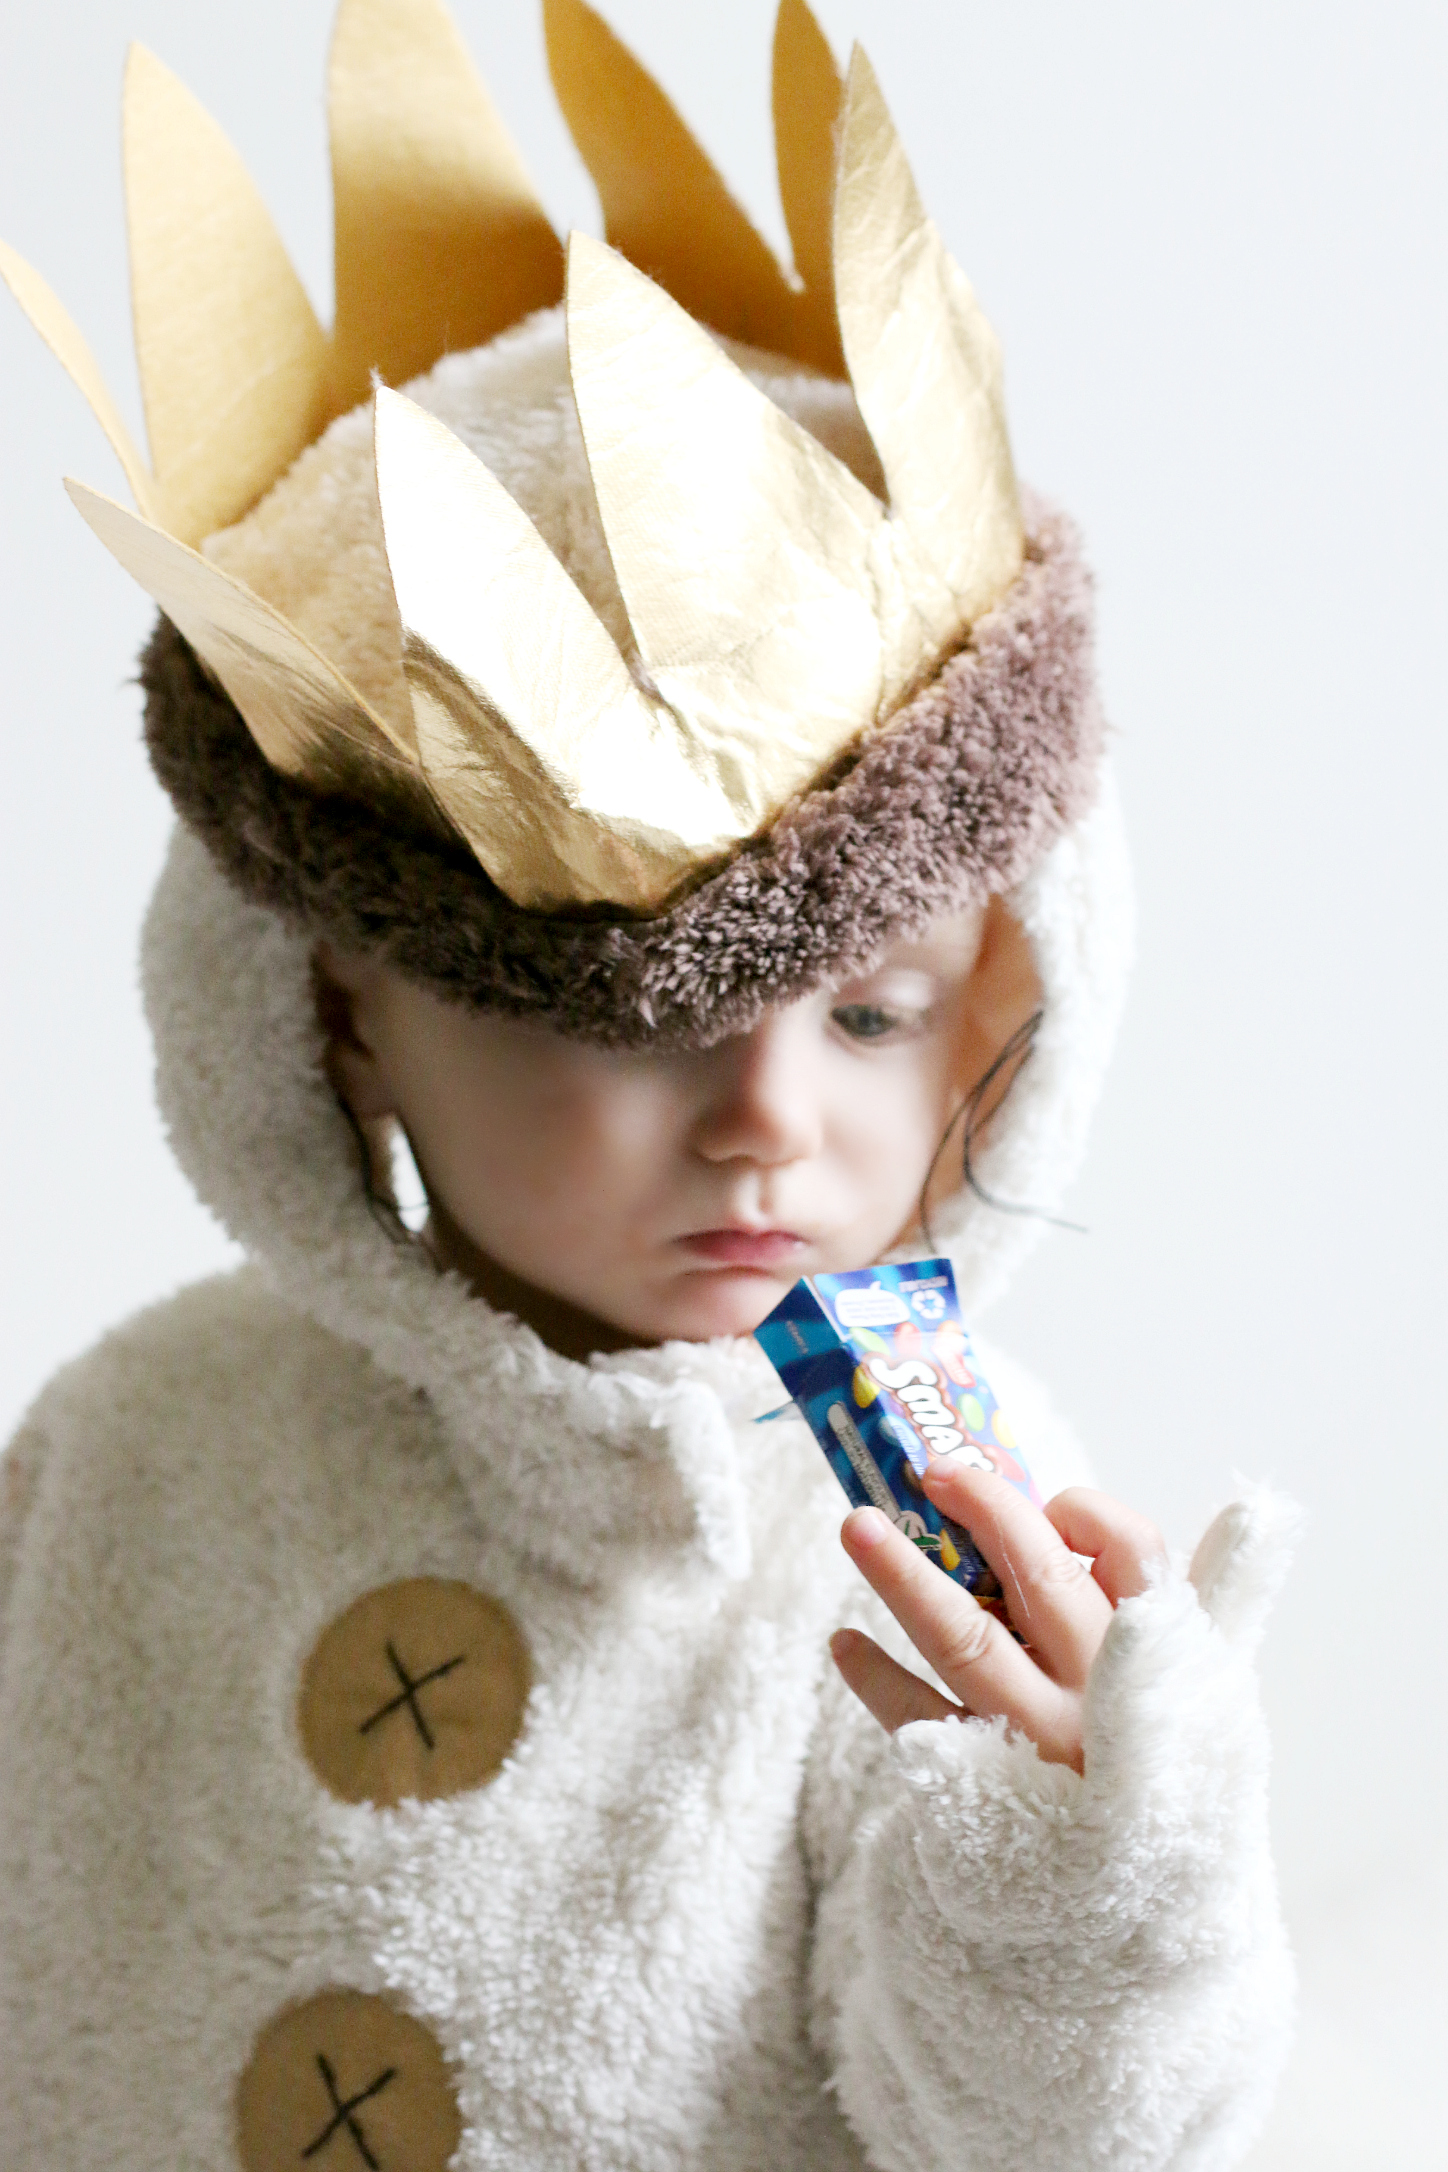 Pottery Barn Kids Costume Where the Wild Things Are